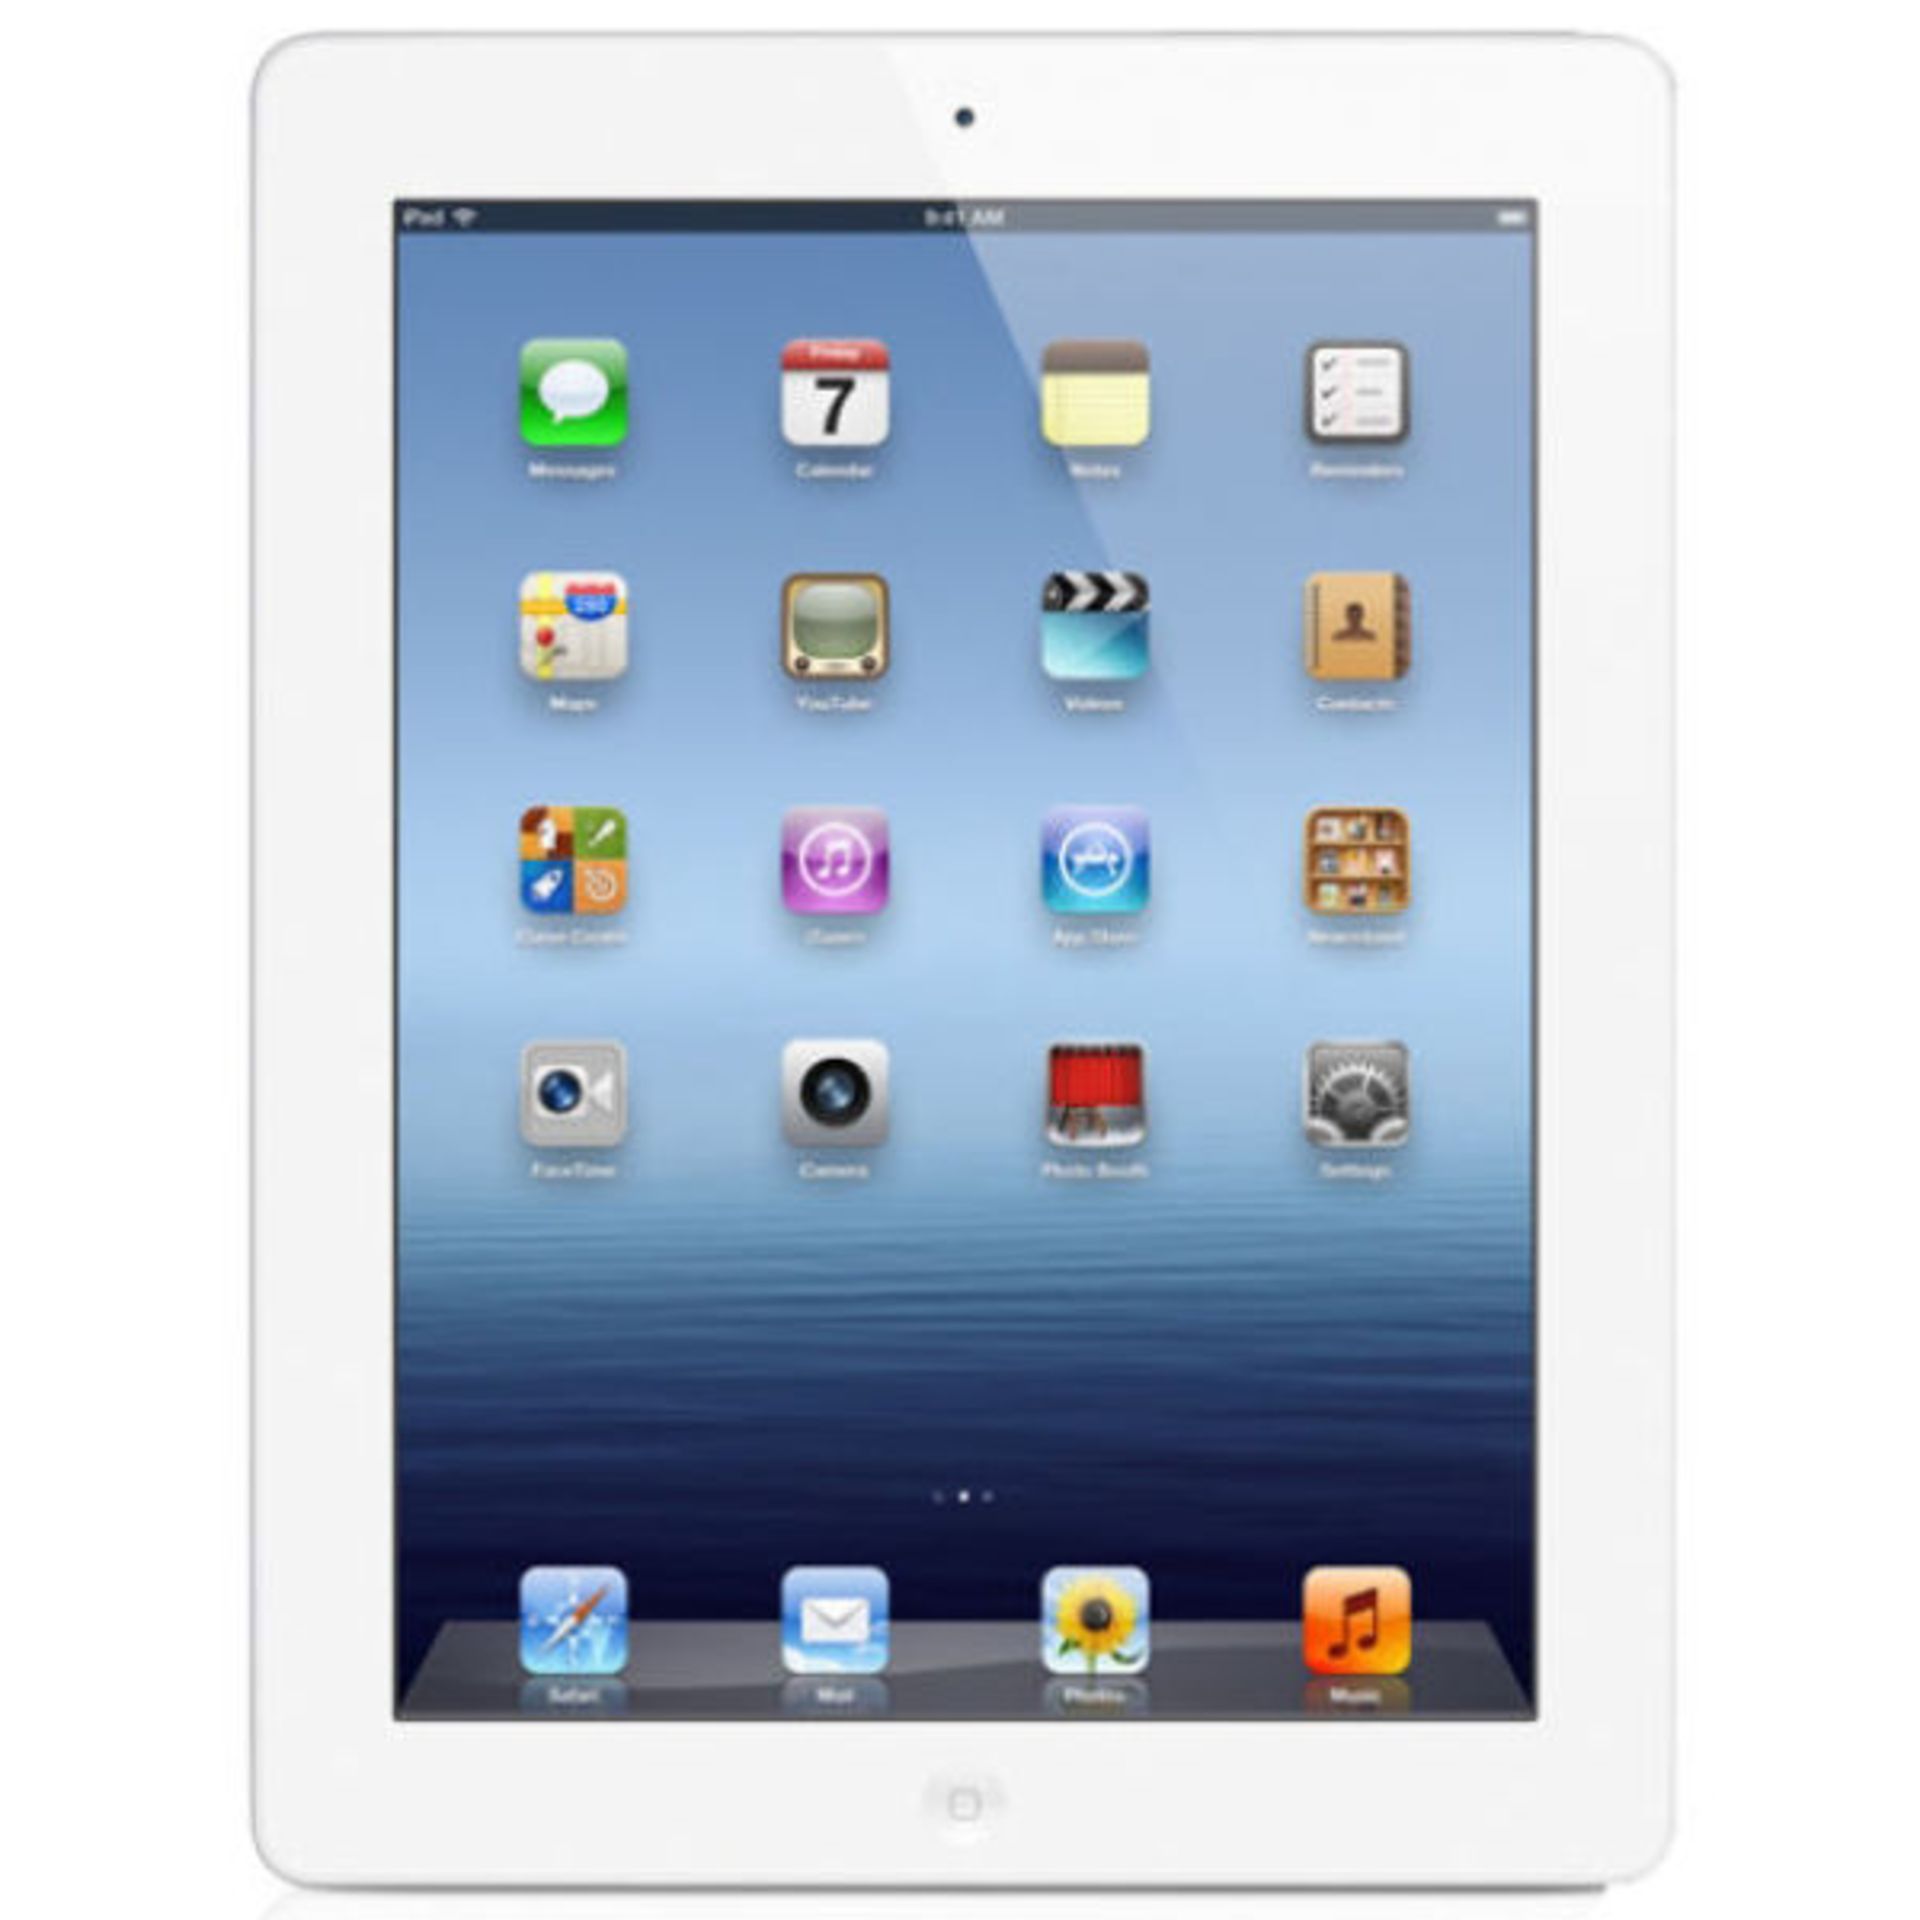 V Grade B Apple iPad 4 16GB - White - Wi-Fi - Unit Only X 2 YOUR BID PRICE TO BE MULTIPLIED BY TWO